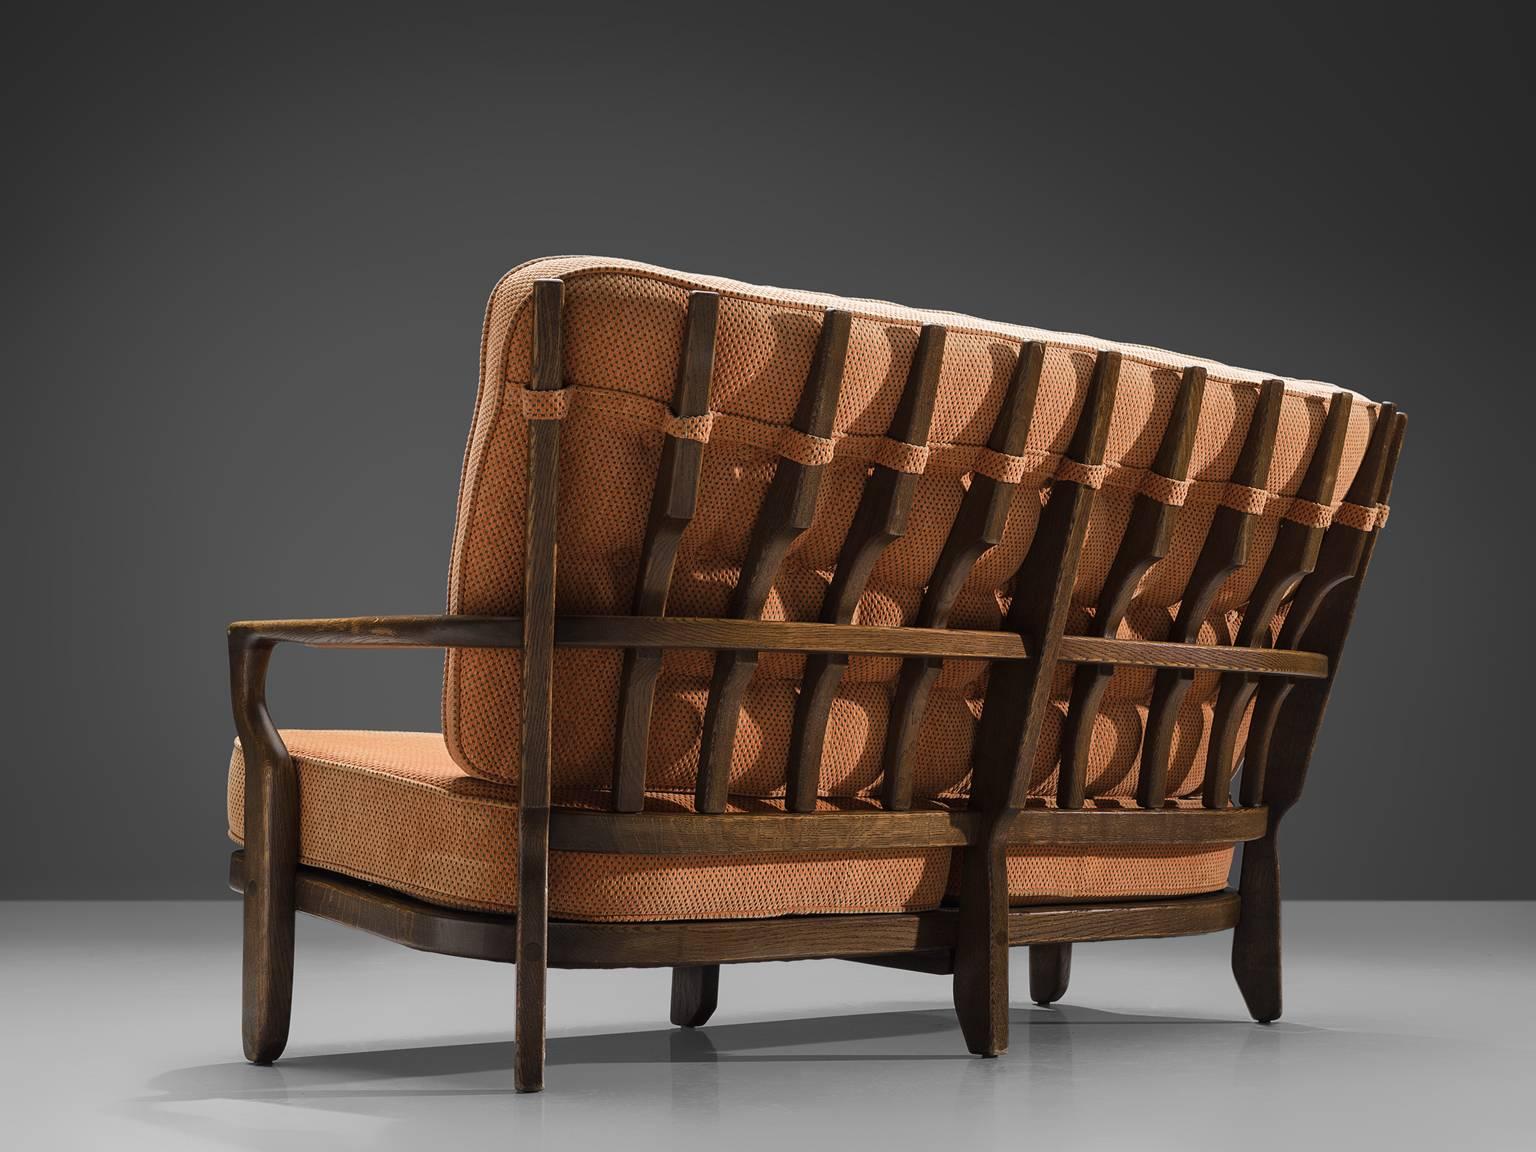 Guillerme and Chambron, peach, pink fabric, oak, France, 1950s

This sculptural carved oak settee is designed by Guillerme and Chambron. The design duo is known for their sculptural, crafted solid oak furniture. This comfortable sofa has an